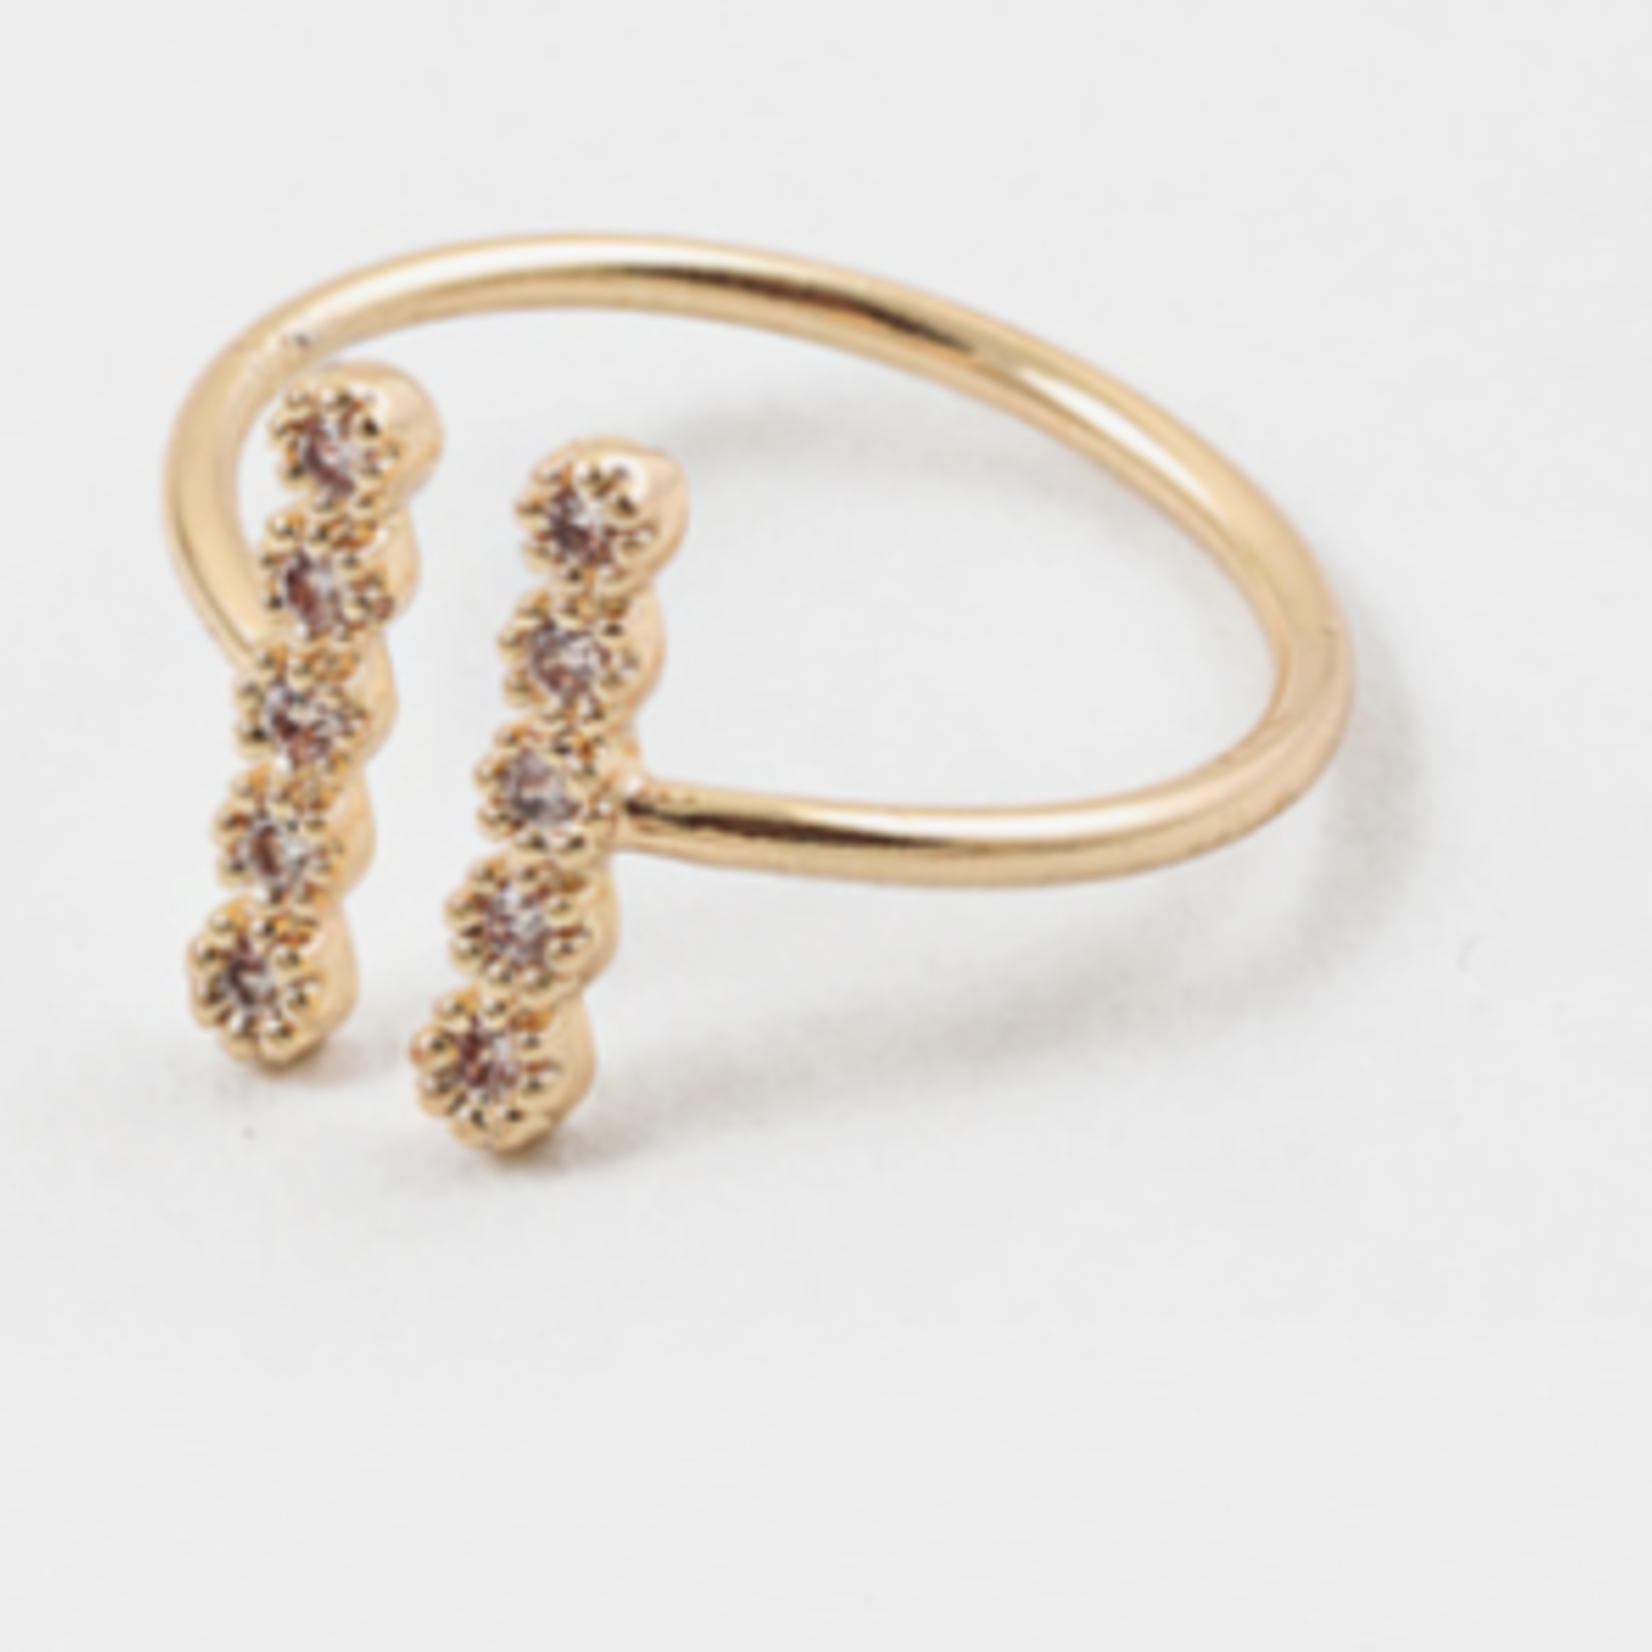 Gold Band Open Ring w/ Vertical Pave CZ Bars